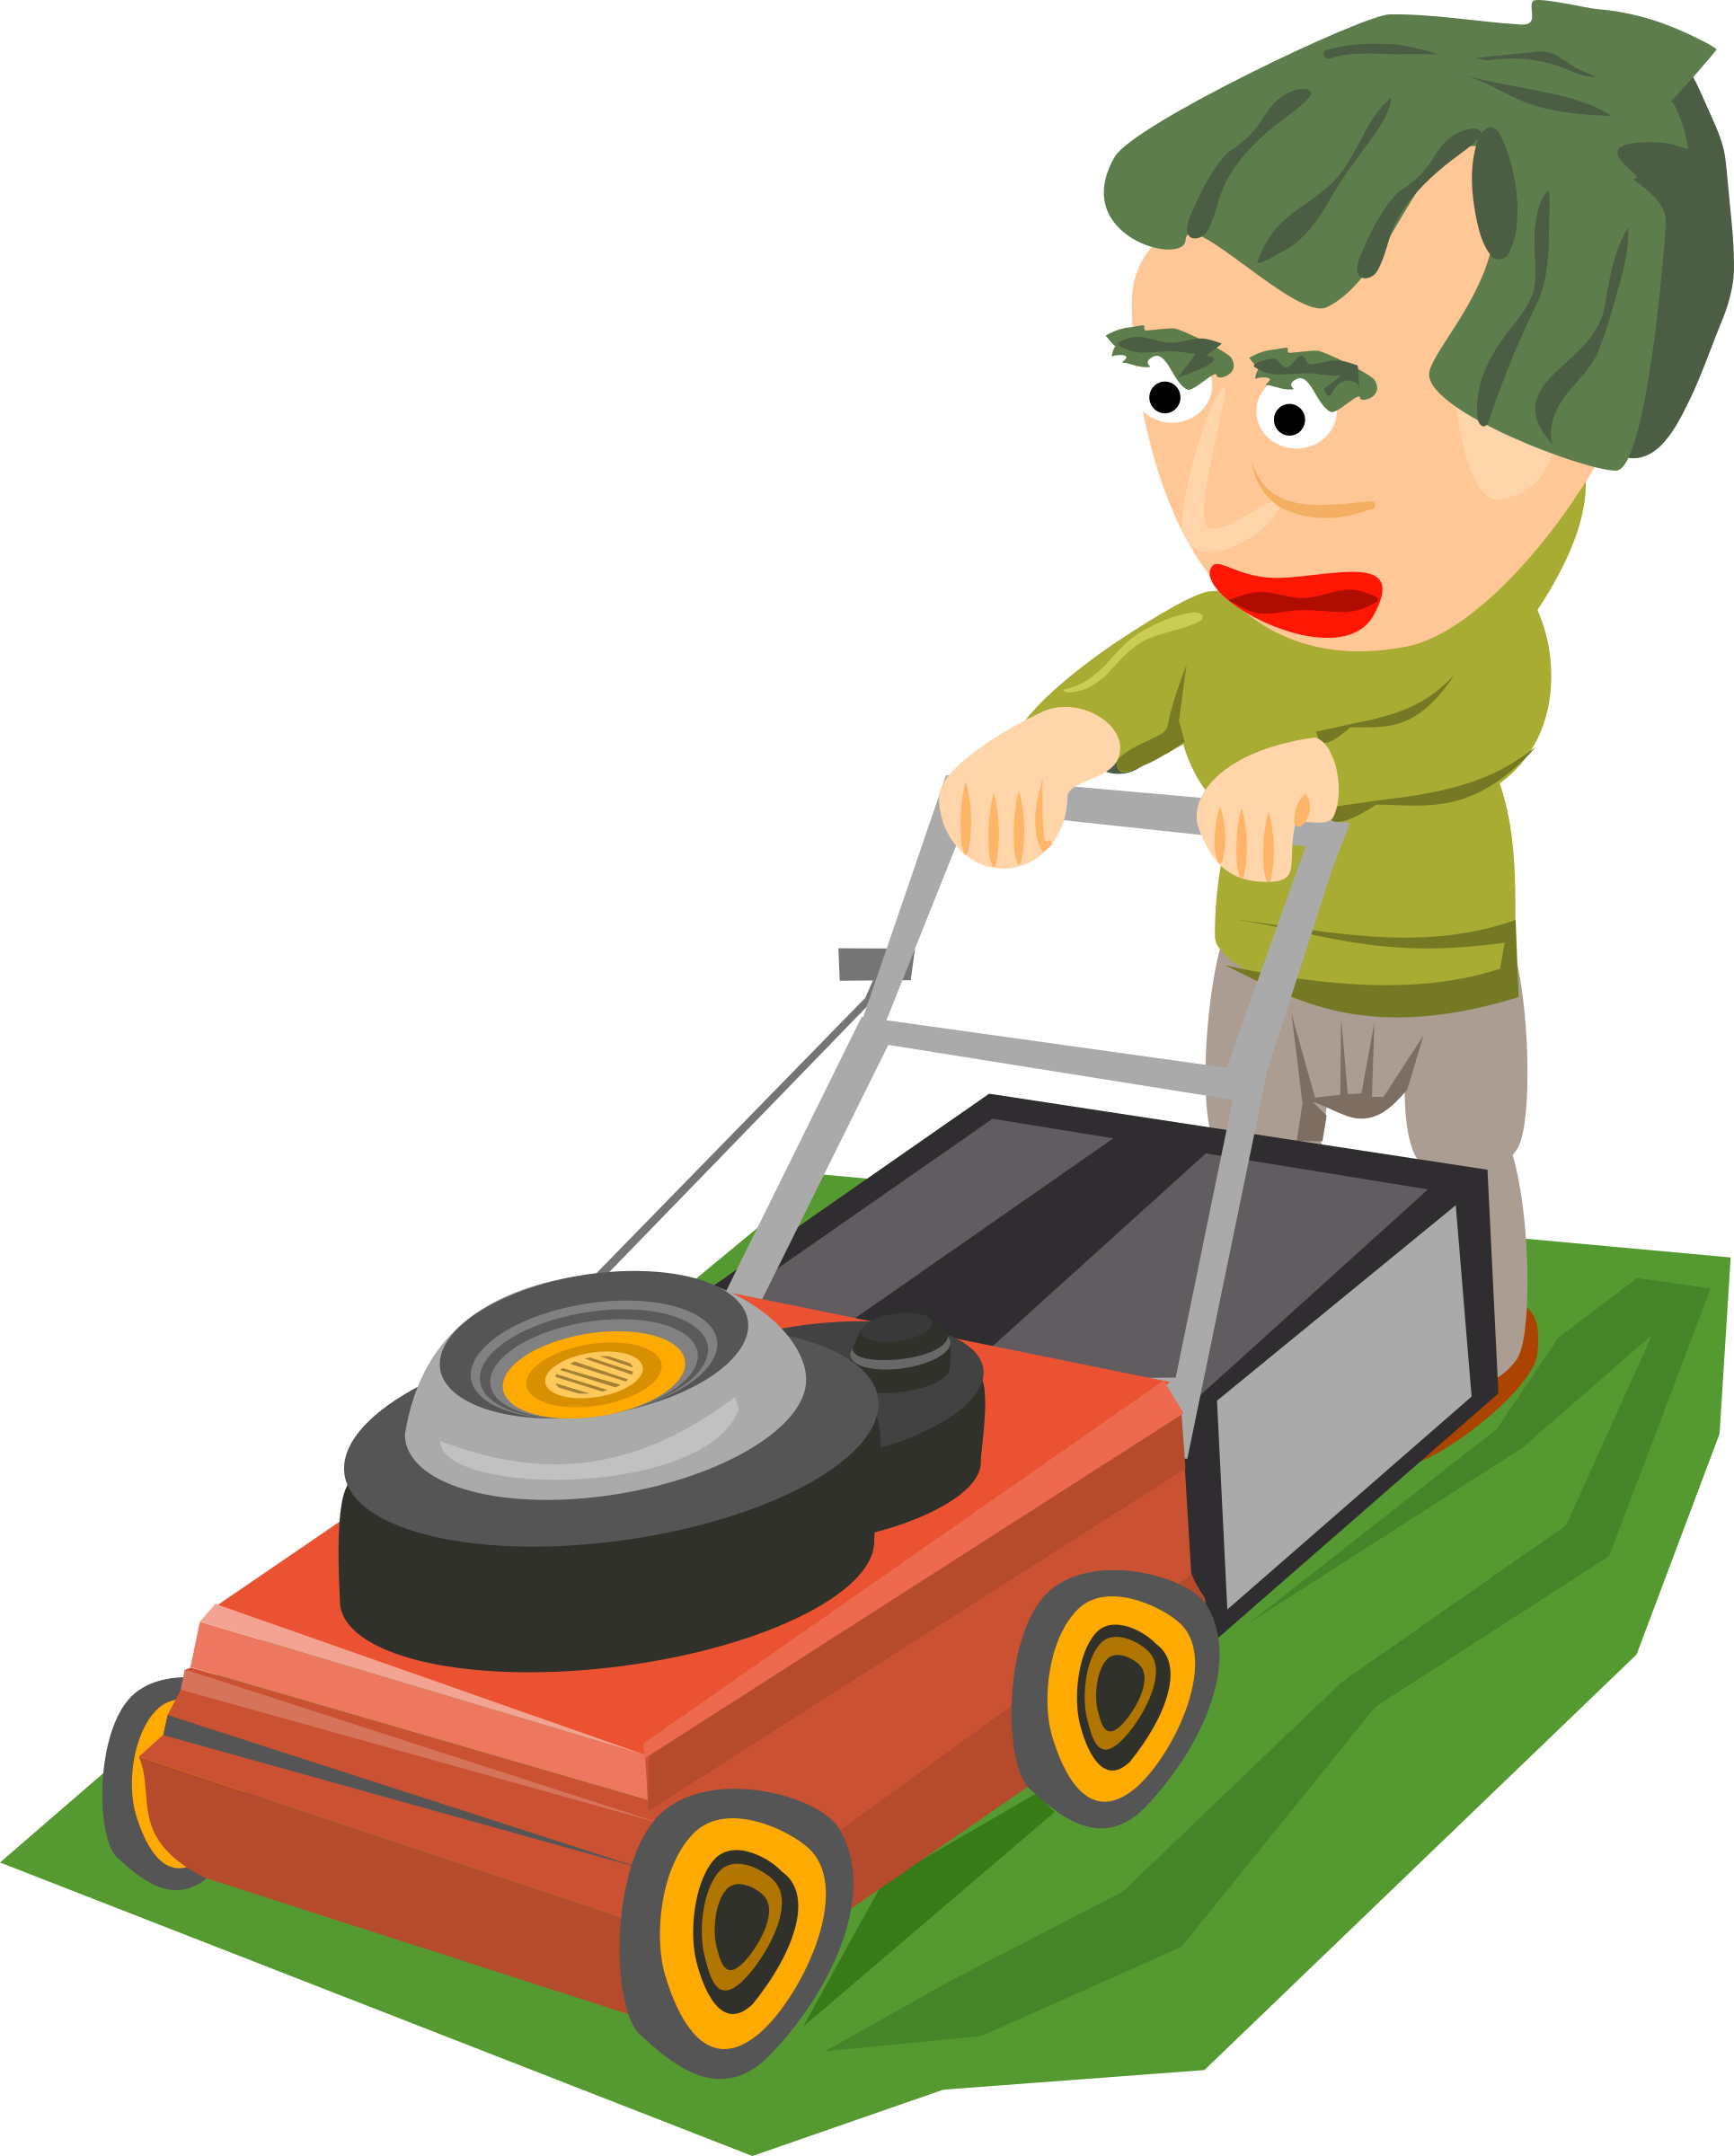 Clipart - Mowing the lawn